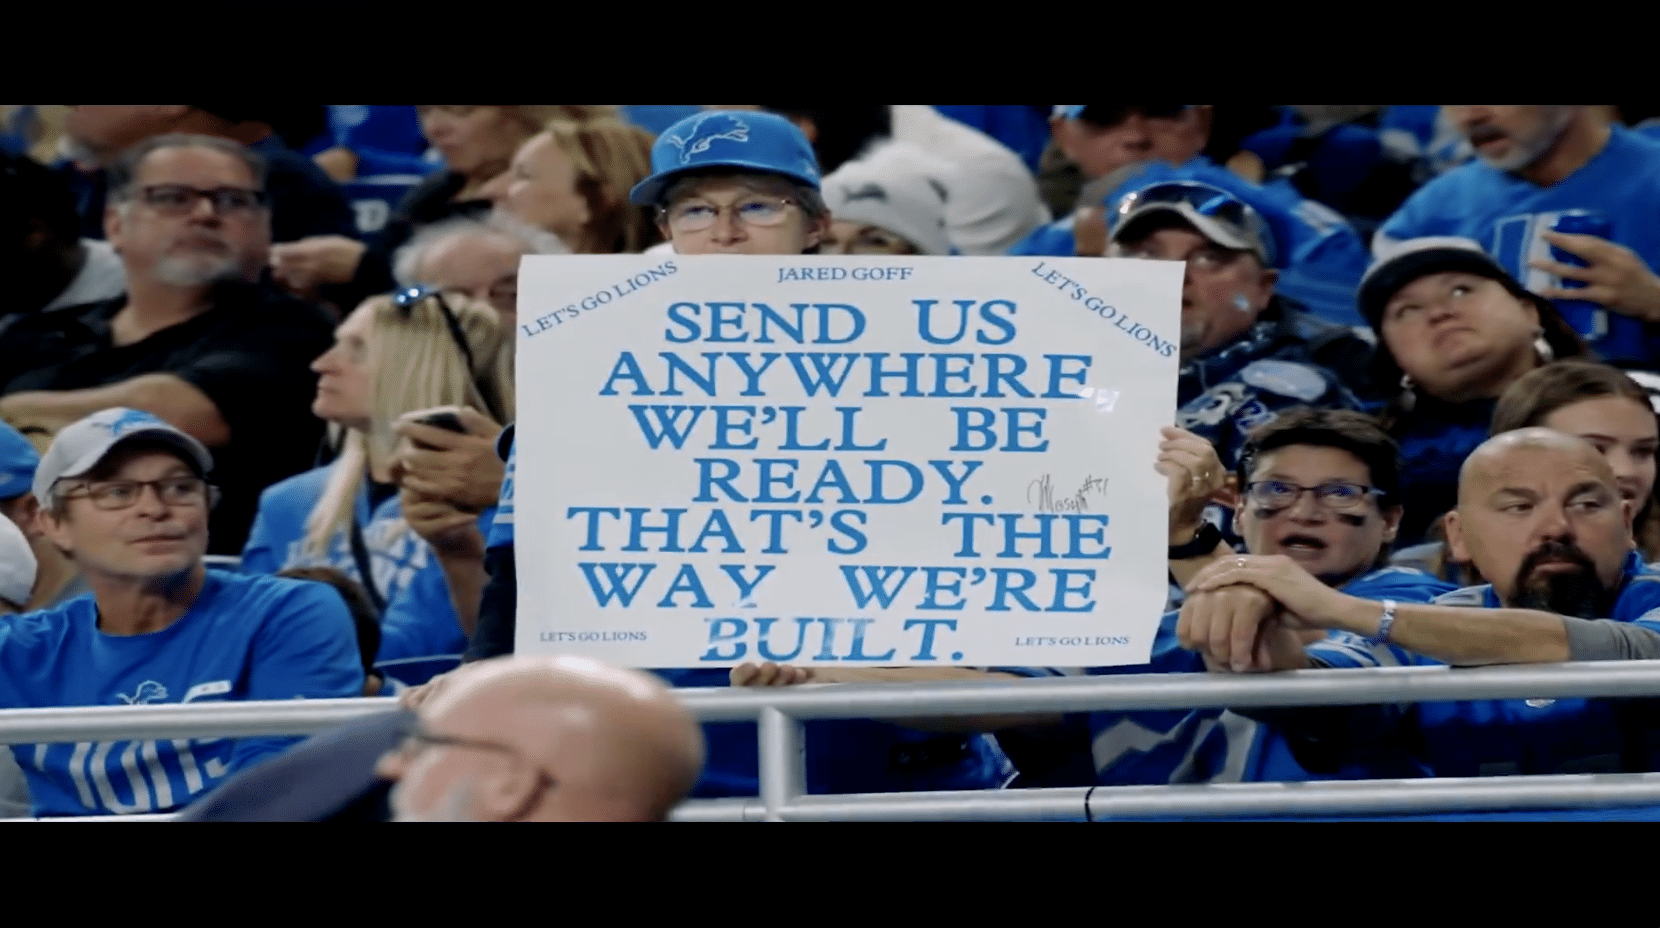 Detroit Lions Playoff Hype Video